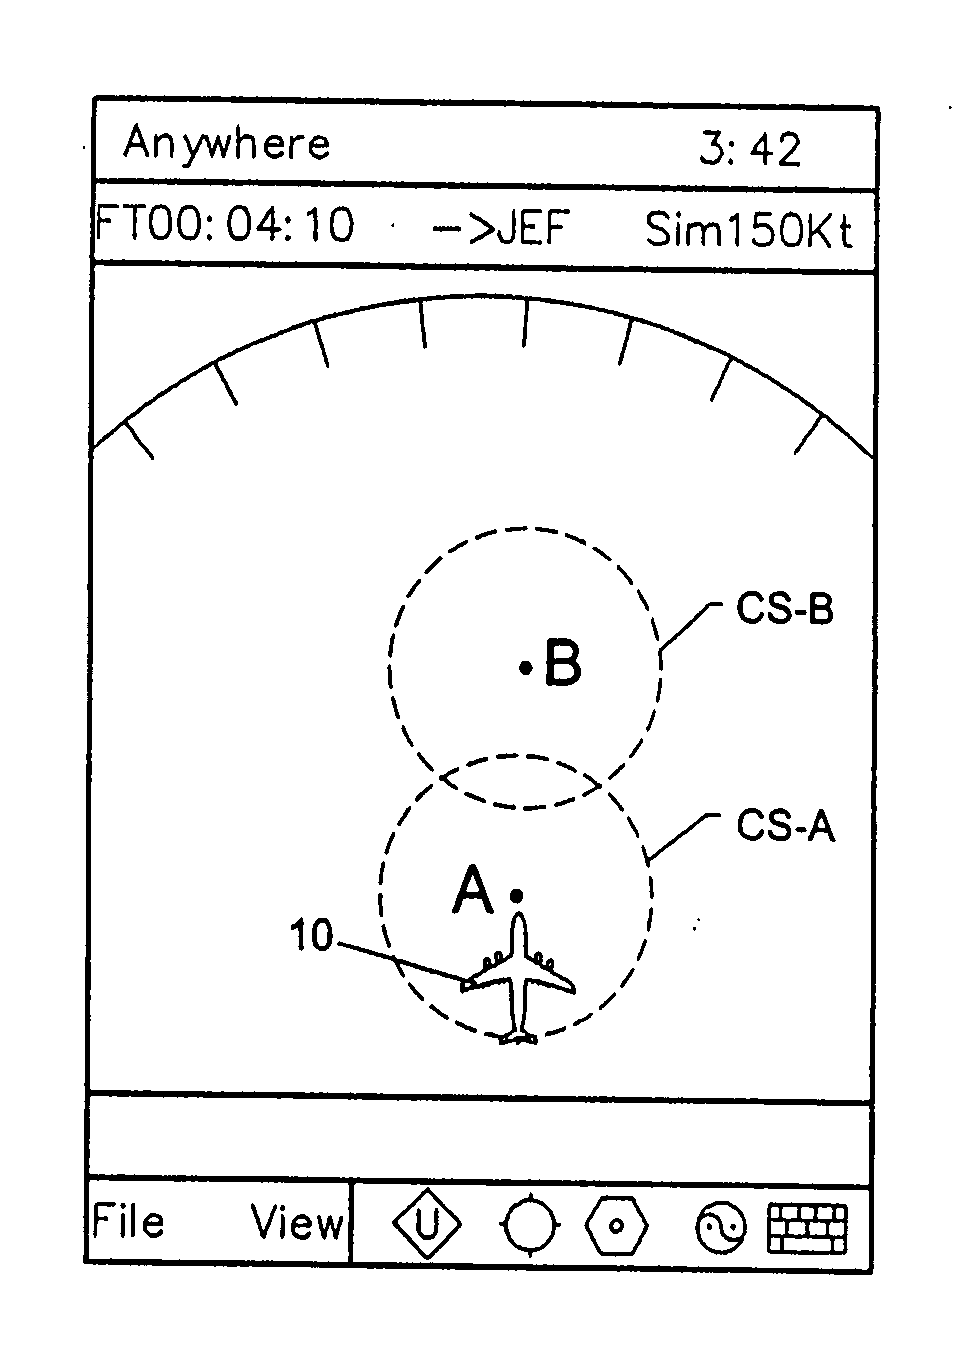 Flight management system and method for providing navigational reference to emergency landing locations